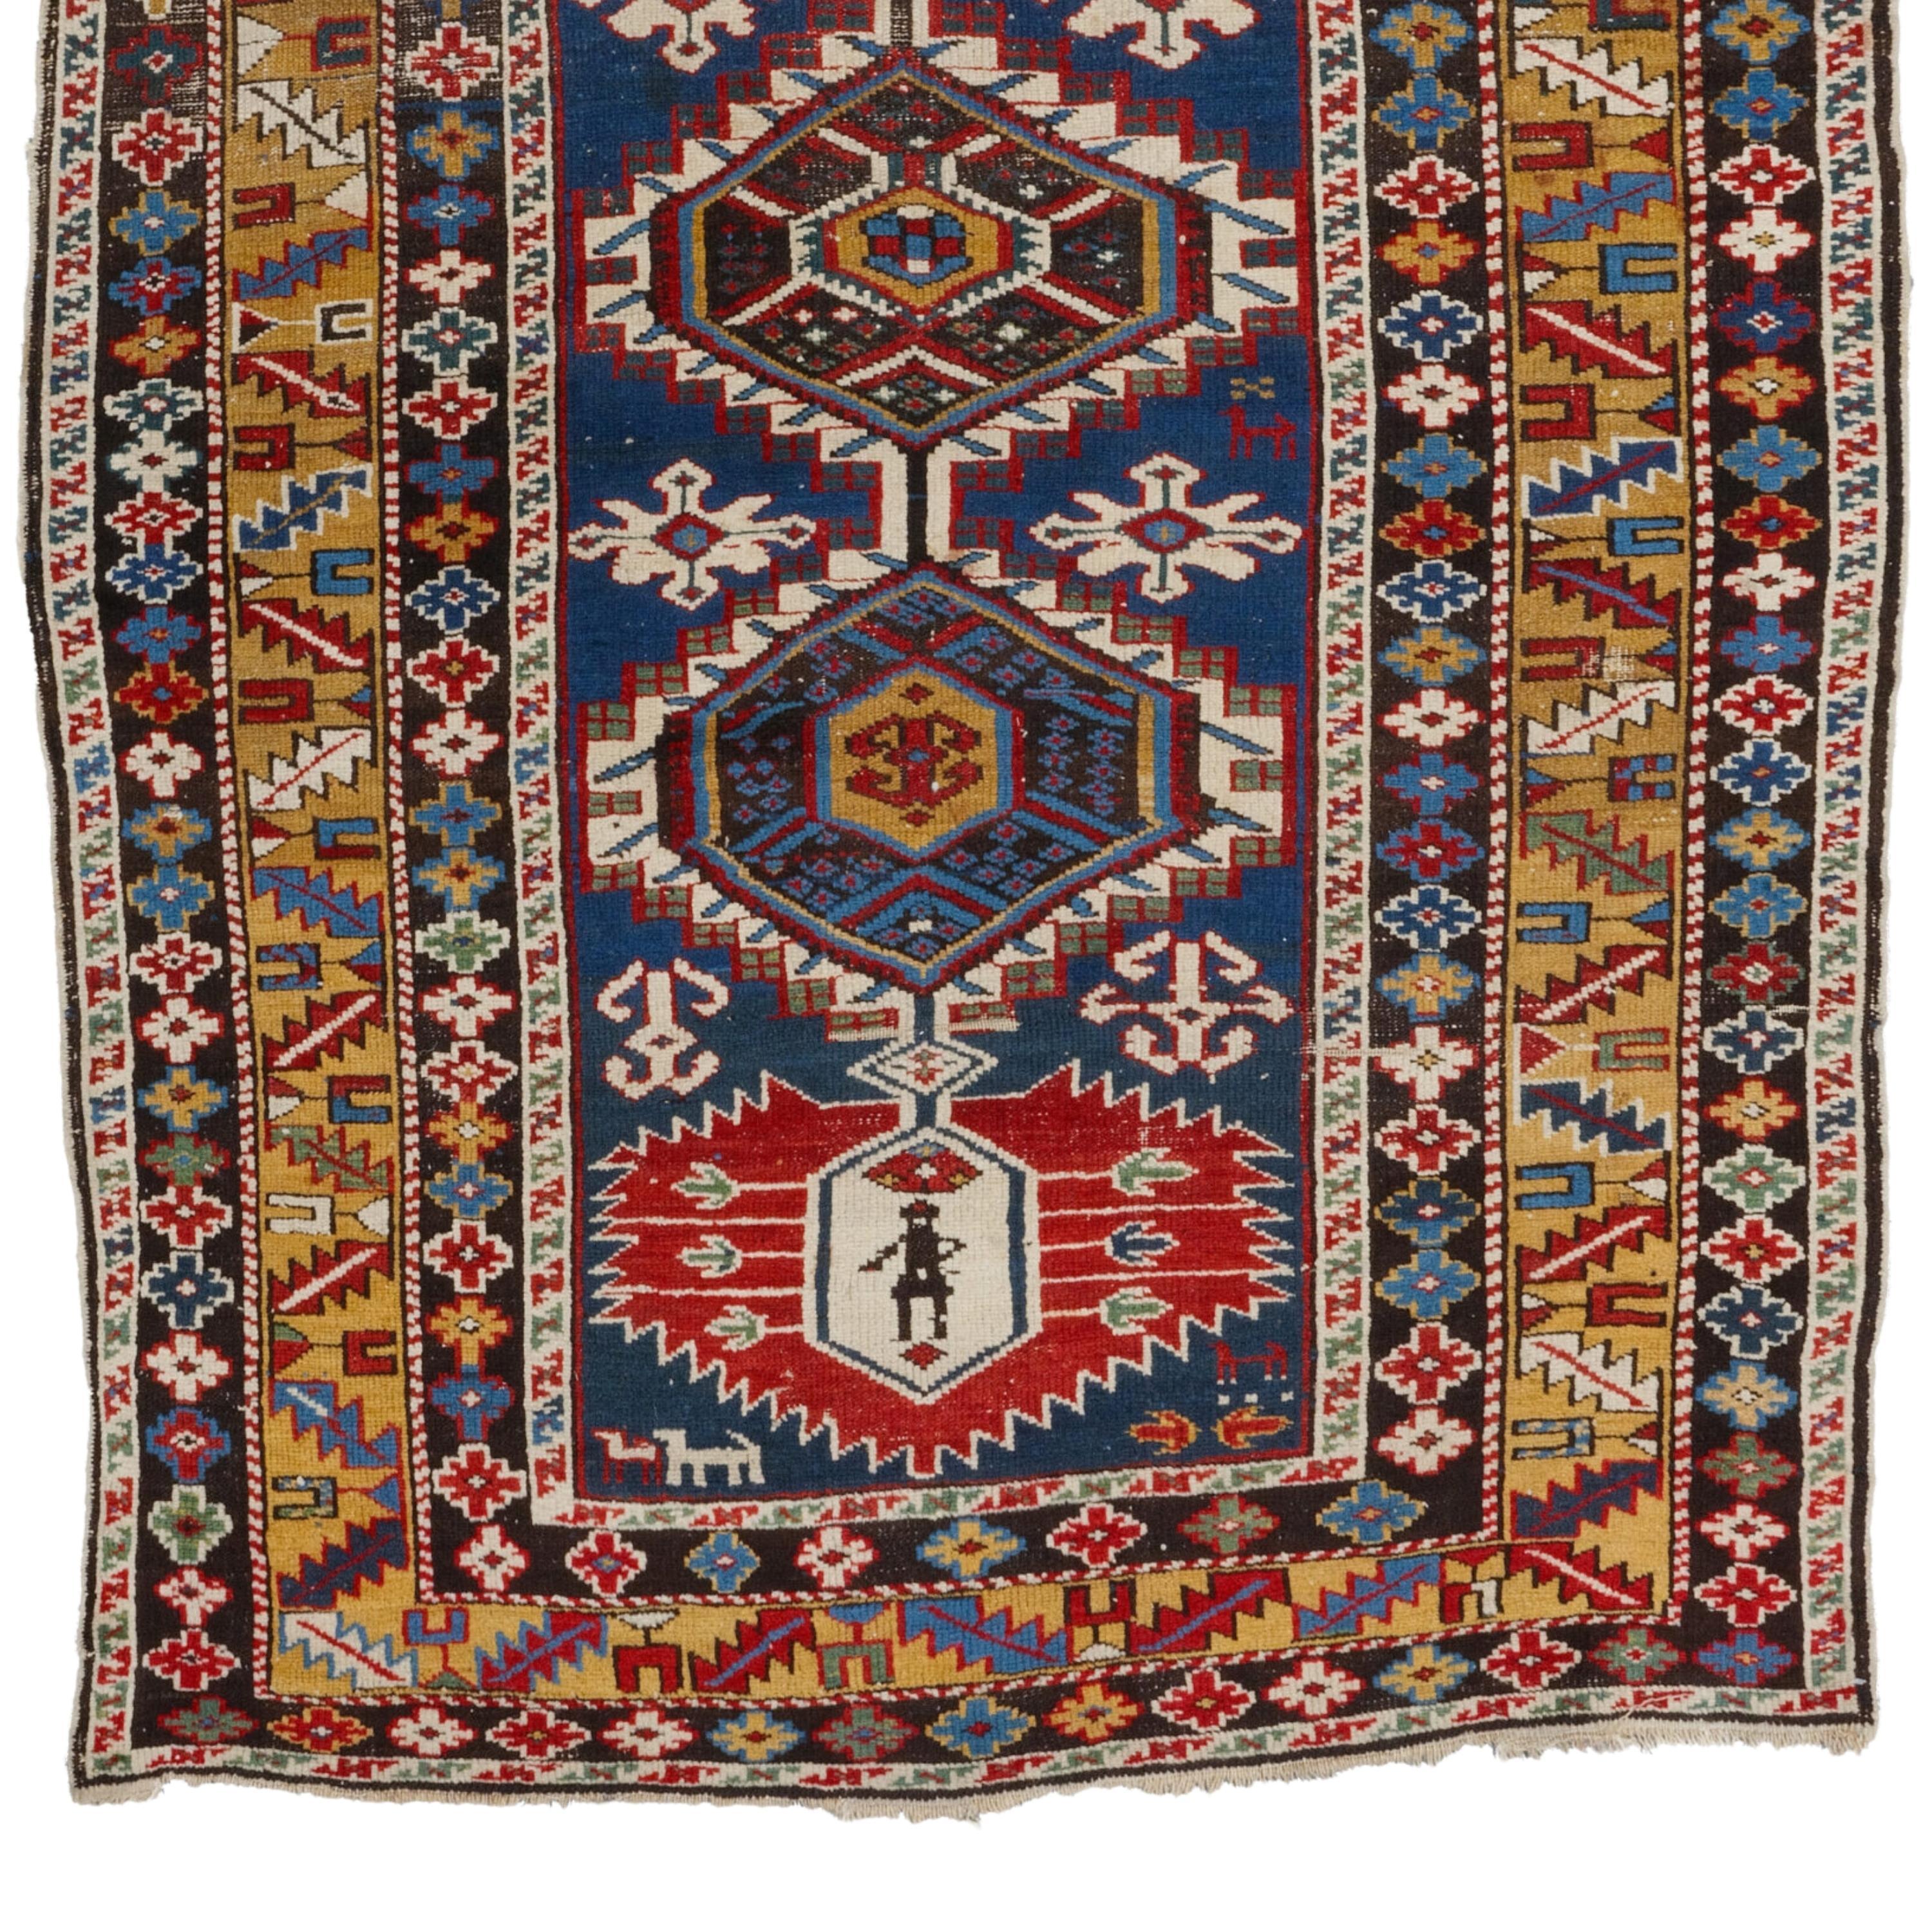 Middle of 19th Century Shirvan Karagashli Rug
Size 118 x 173 cm (46,45 x 68,11 In)

This small, stunningly beautiful and extraordinarly fine Shirvan of the so-called ‘Karagashli’ group is of the highest quality, both in material and in aesthetic